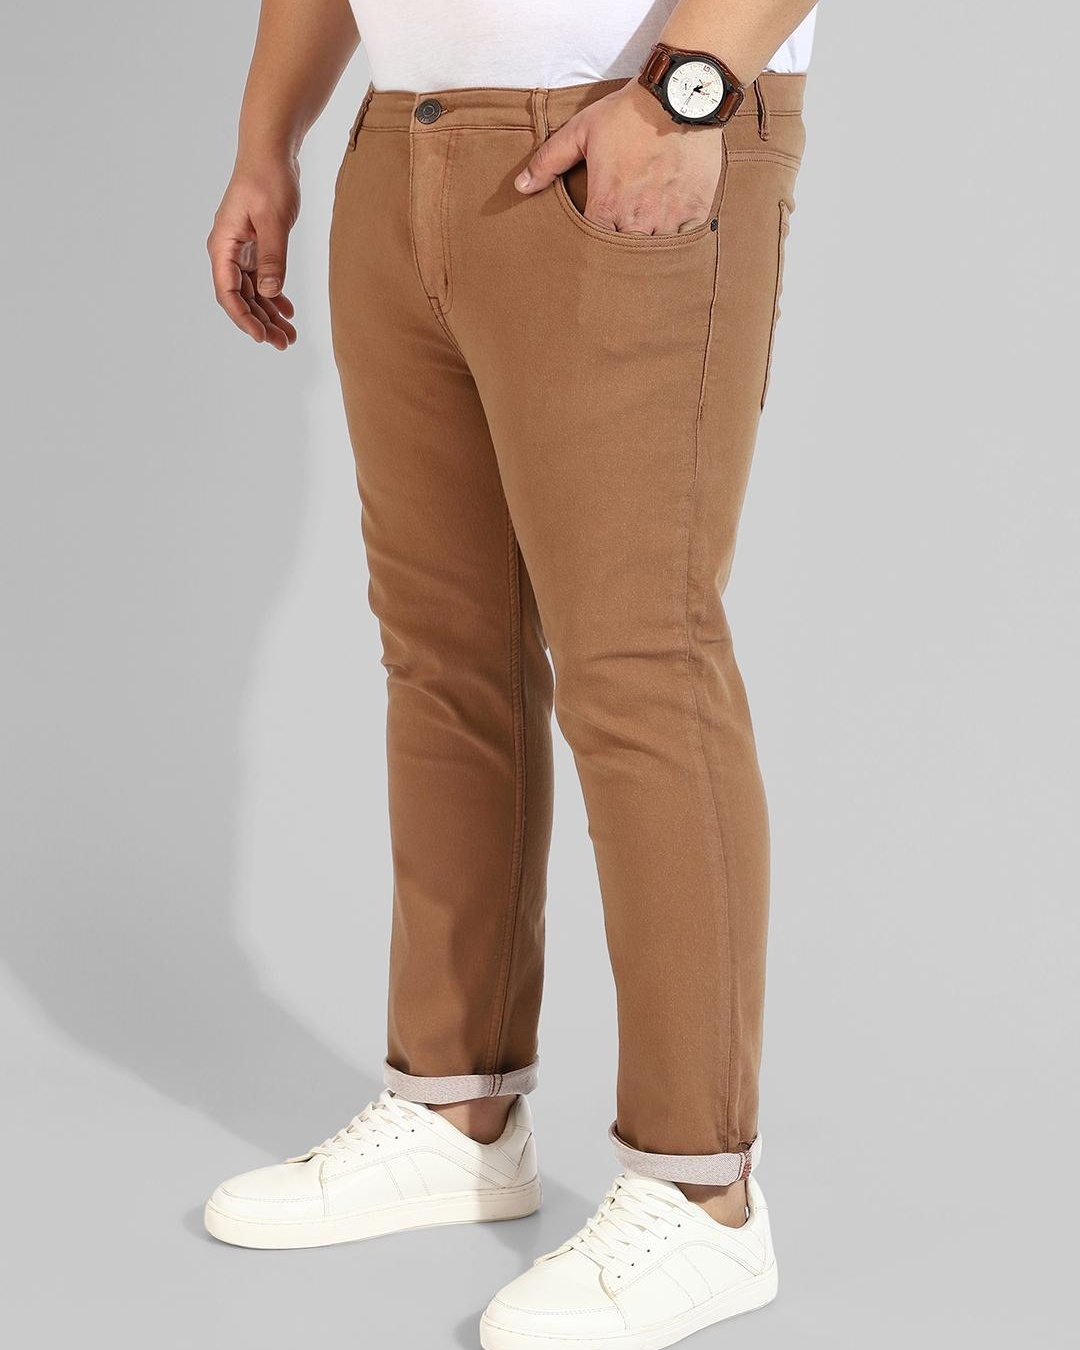 Brown Straight-Leg Jeans by LEMAIRE on Sale